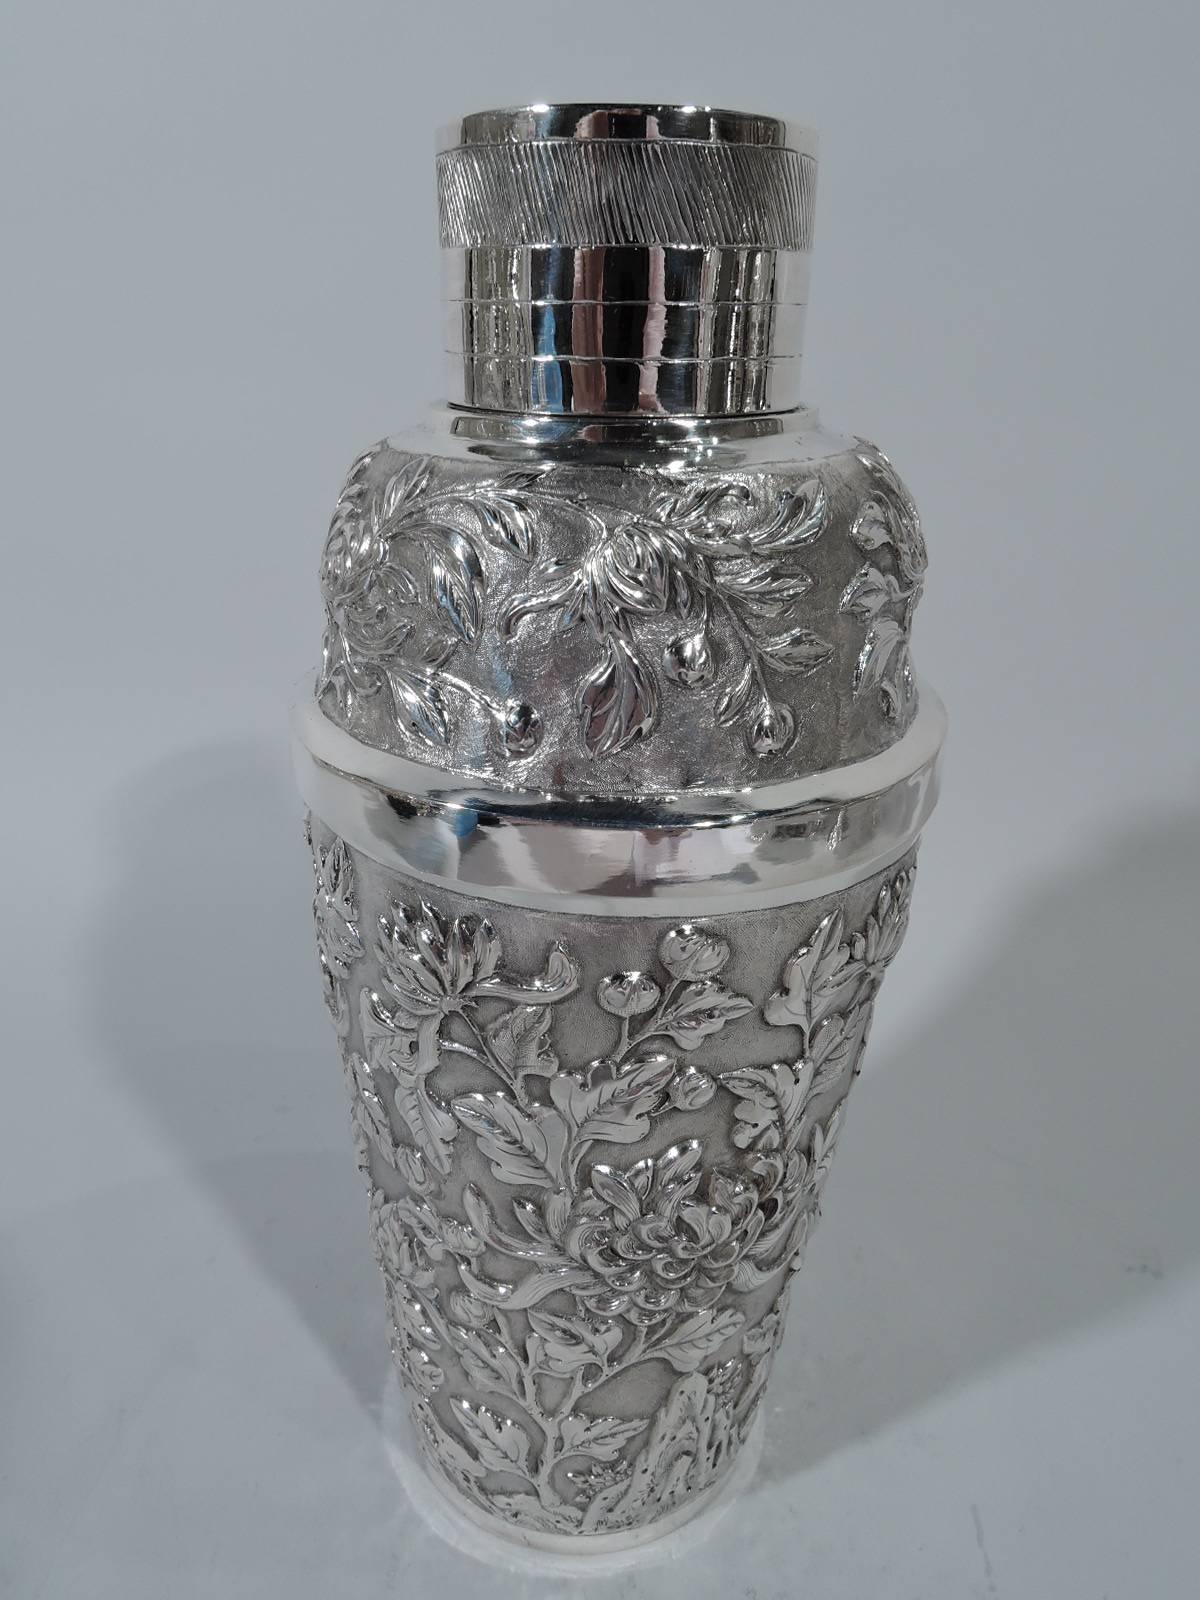 Chinese export silver cocktail shaker, circa 1900. Tapering cup. Cover has curved shoulders and cylindrical neck with cap and built-in strainer. Repousse chrysanthemums on stippled ground. Cover sides have engraved bands and dense slash lines.